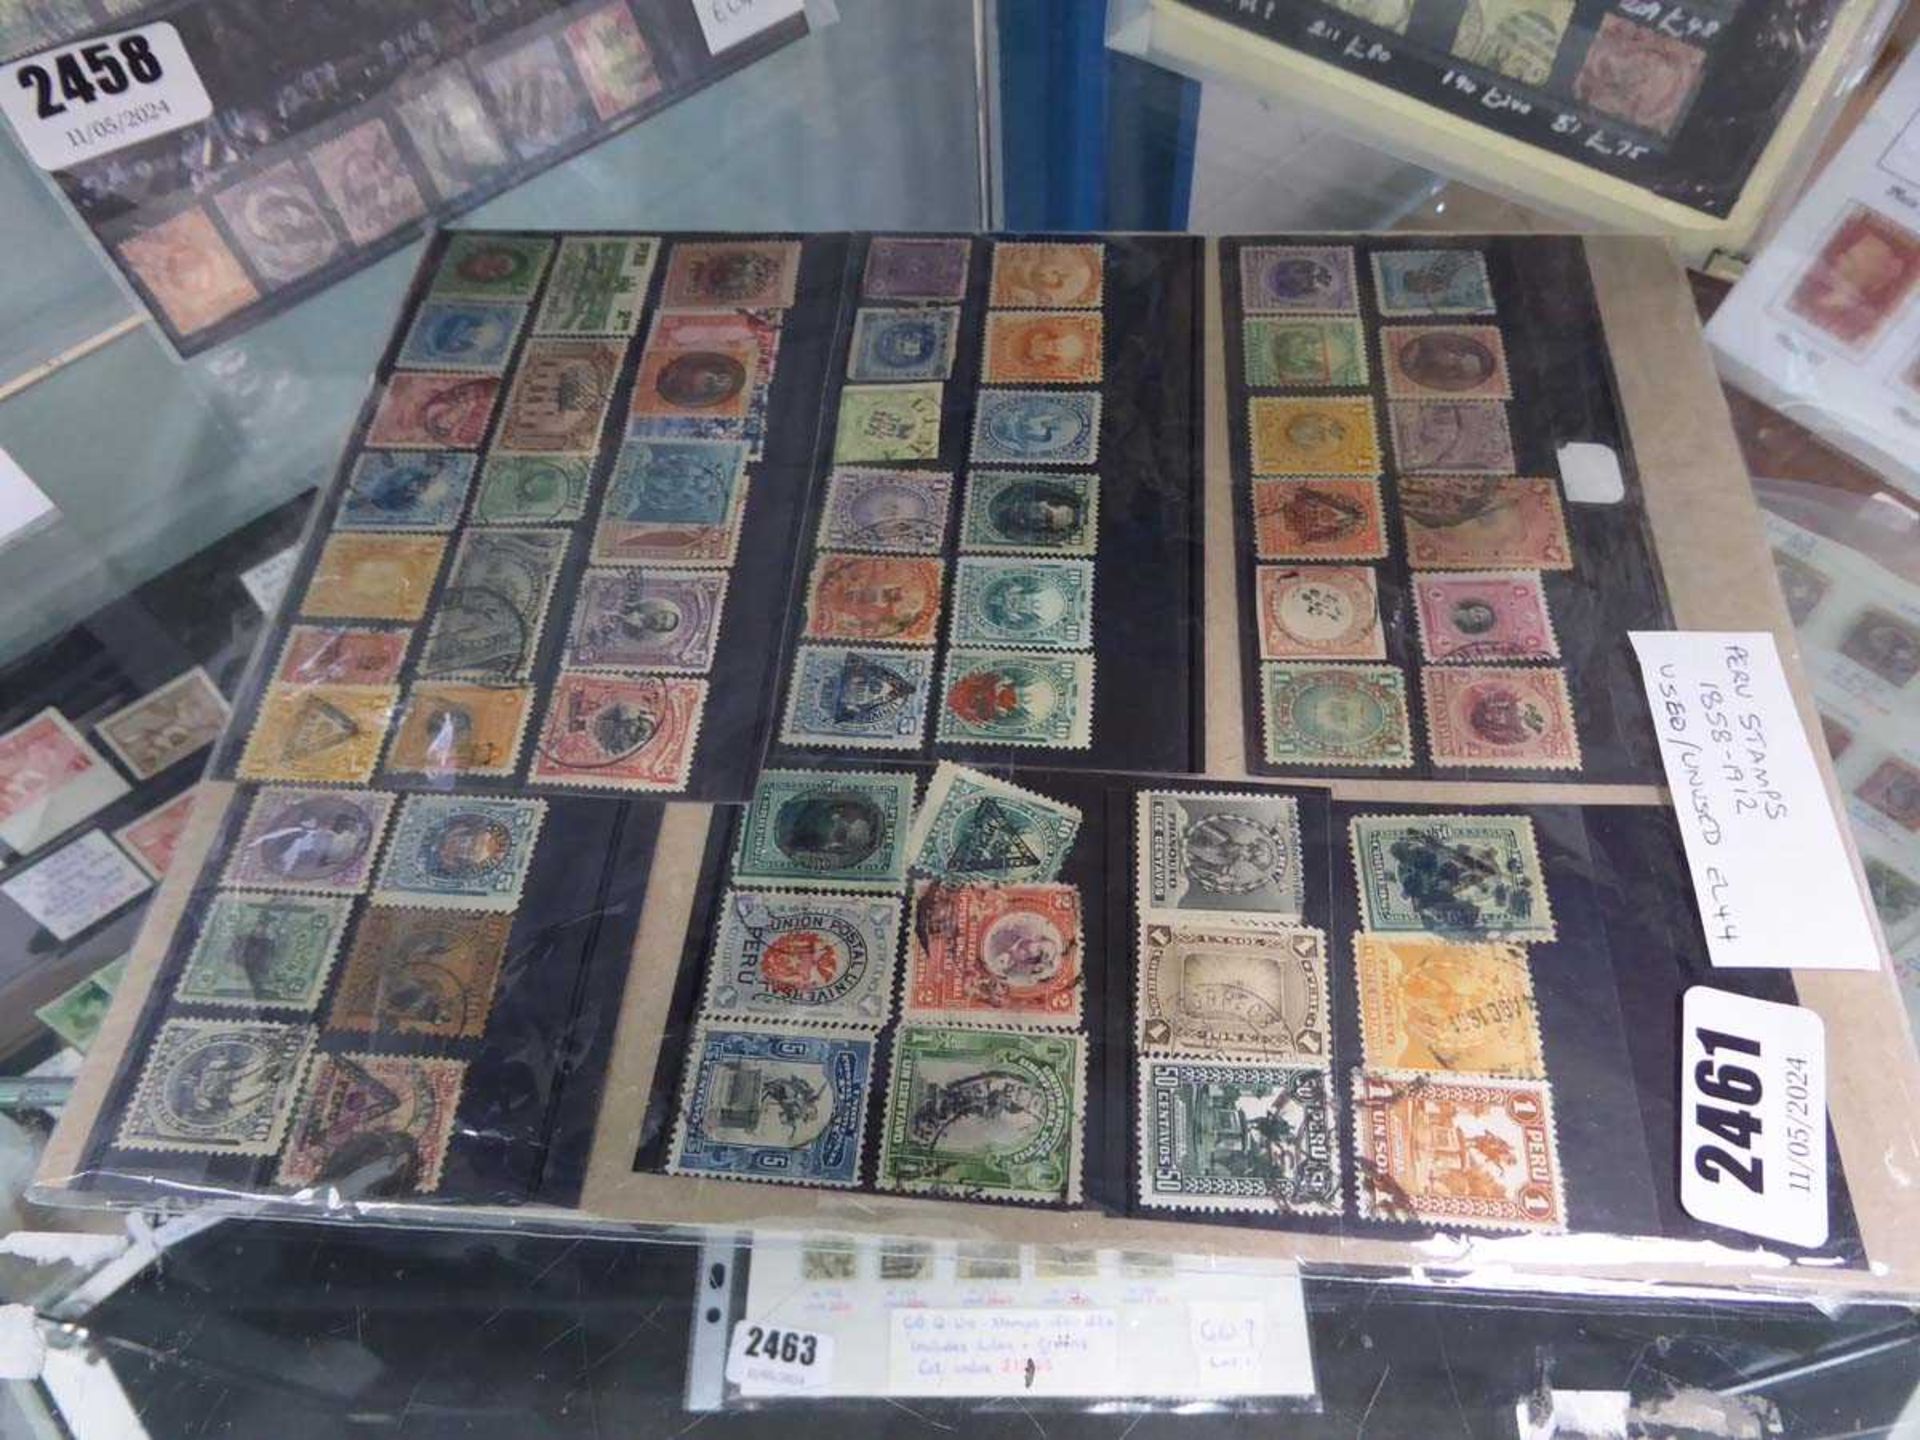 Peru stamps from 1858 - 1912